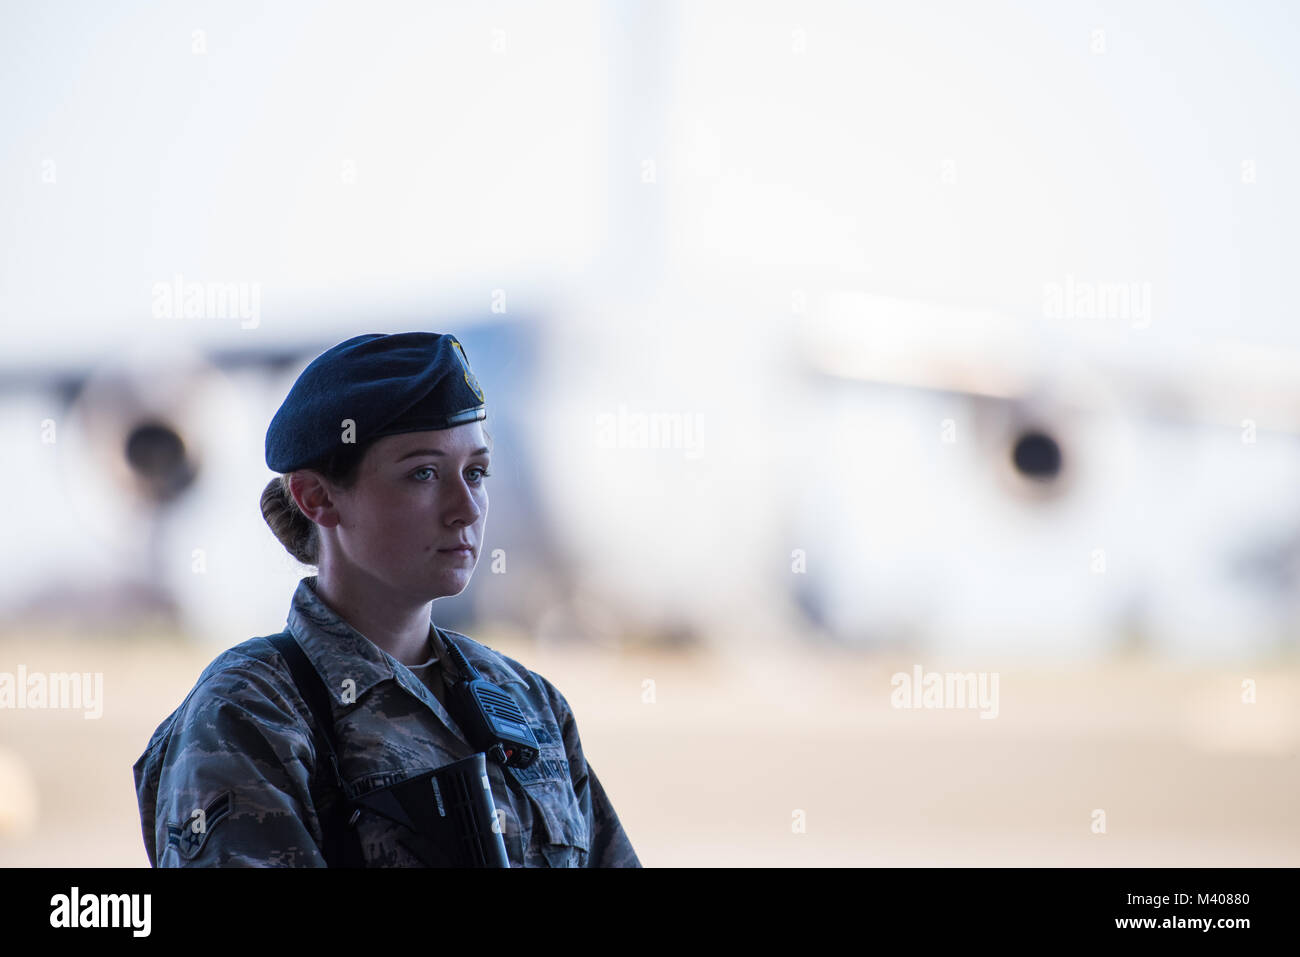 A Security Forces Airmen stands guard on the flight line during the 75th Anniversary kickoff celebration at Travis Air Force Base, Calif., Feb. 8, 2018. The celebration featured the inaugural unveiling of the 75th Anniversary logo on a C-17 Globemaster III. Travis is celebrating 75 years as a major strategic logistics hub for the Pacific and integral part of global power projection for the total force. (U.S. Air Force photo by Master Sgt. Joey Swafford) Stock Photo